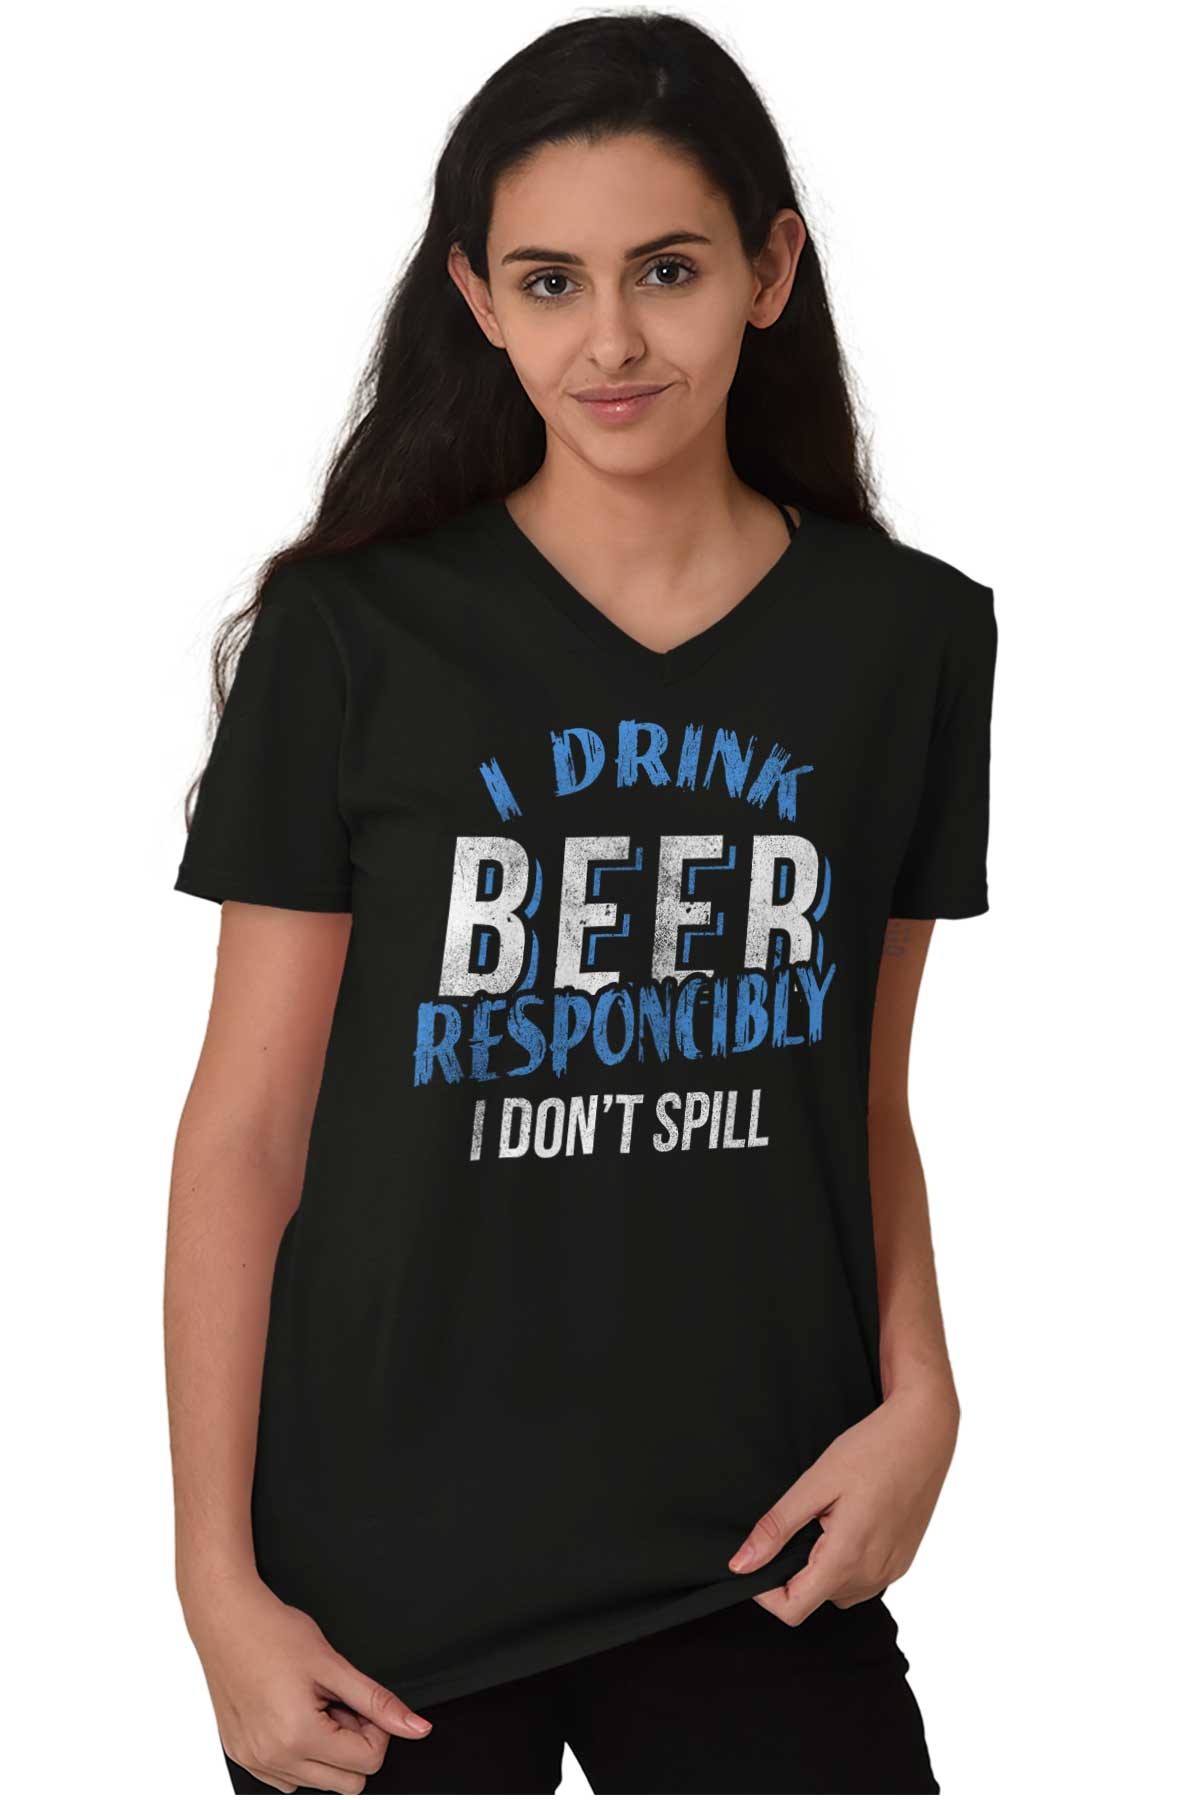 Drink Beer Responsibly College Fraternity V-Neck Tees Shirts Tshirt T ...